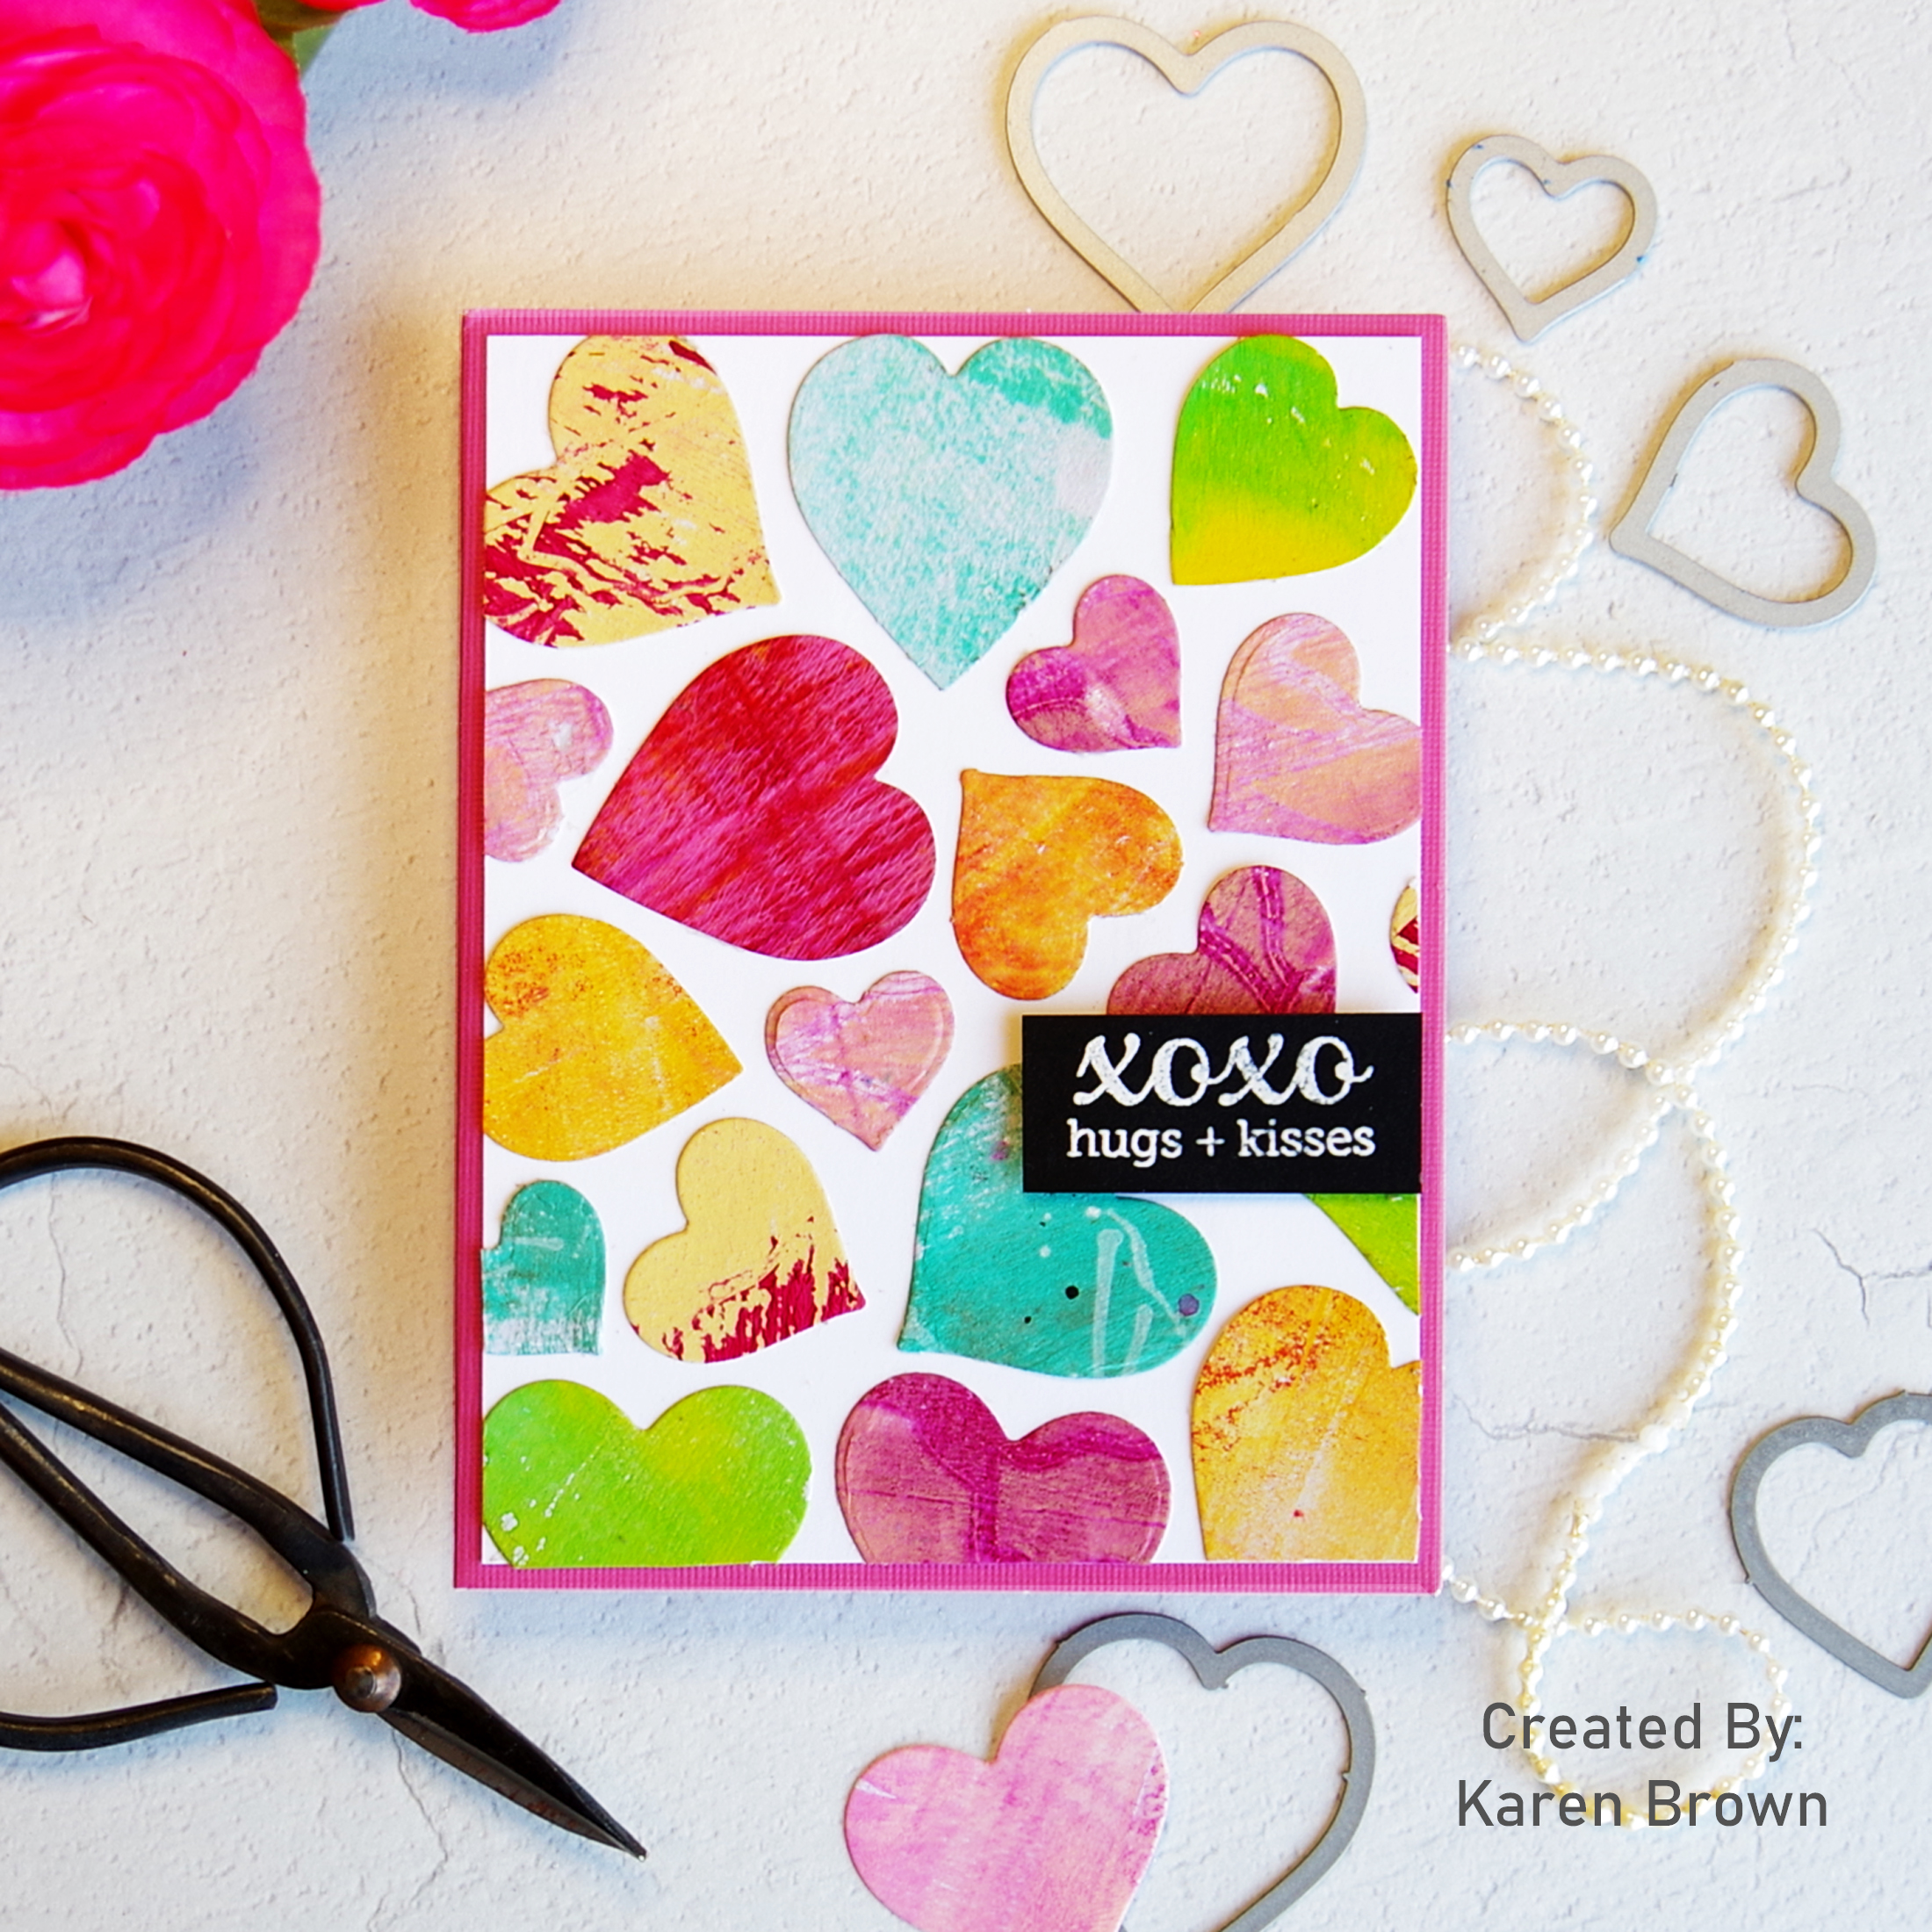 Easy DIY Mixed Media Valentine using handmade heart stickers + great to make with kids.